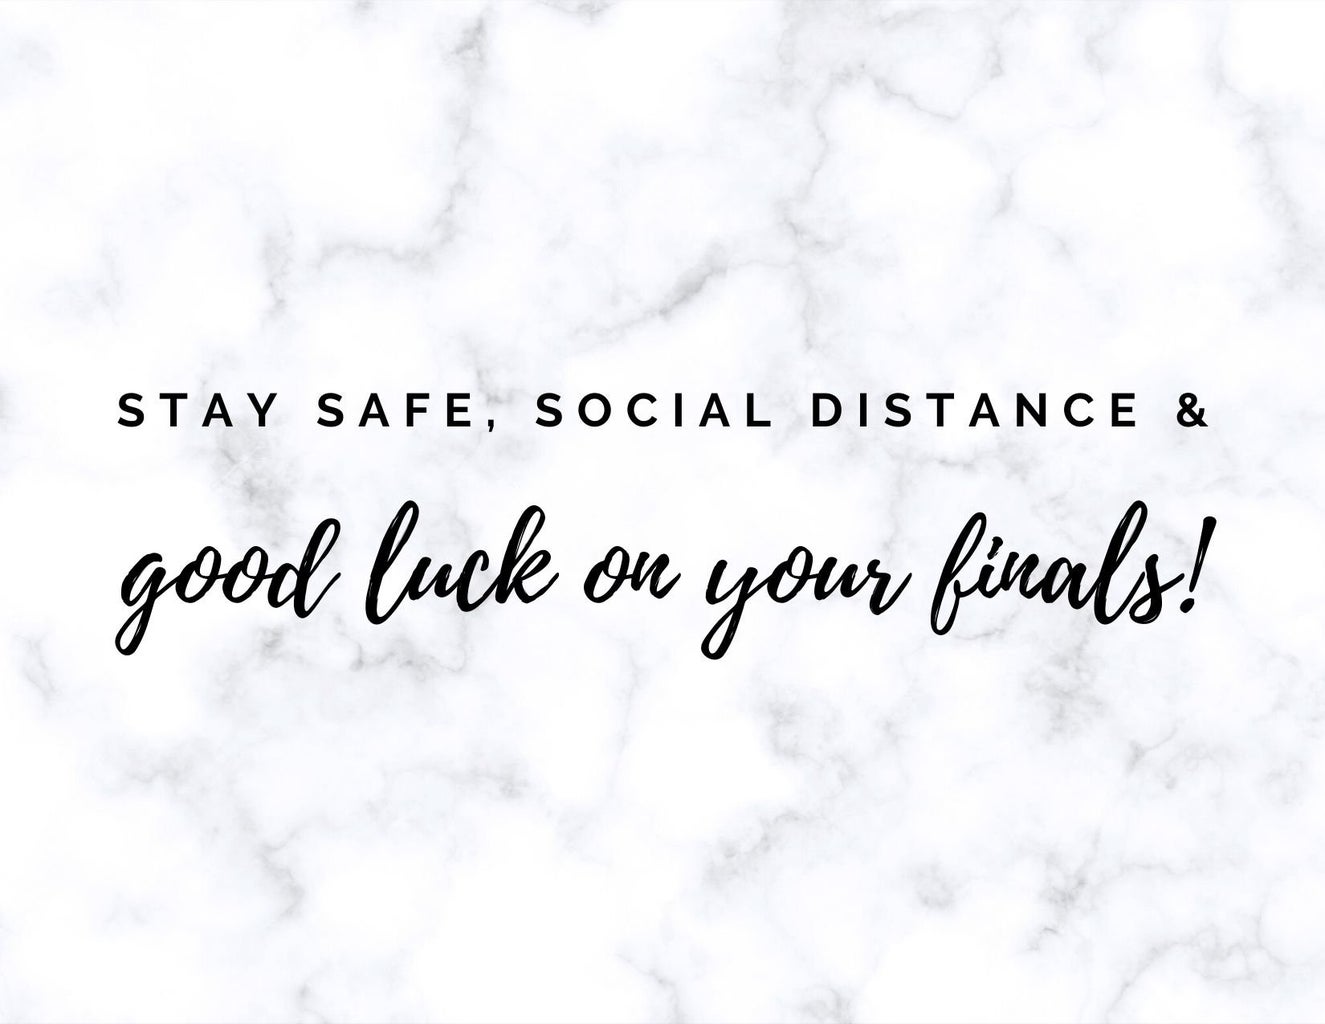 Stay safe, social distance & good luck on your finals